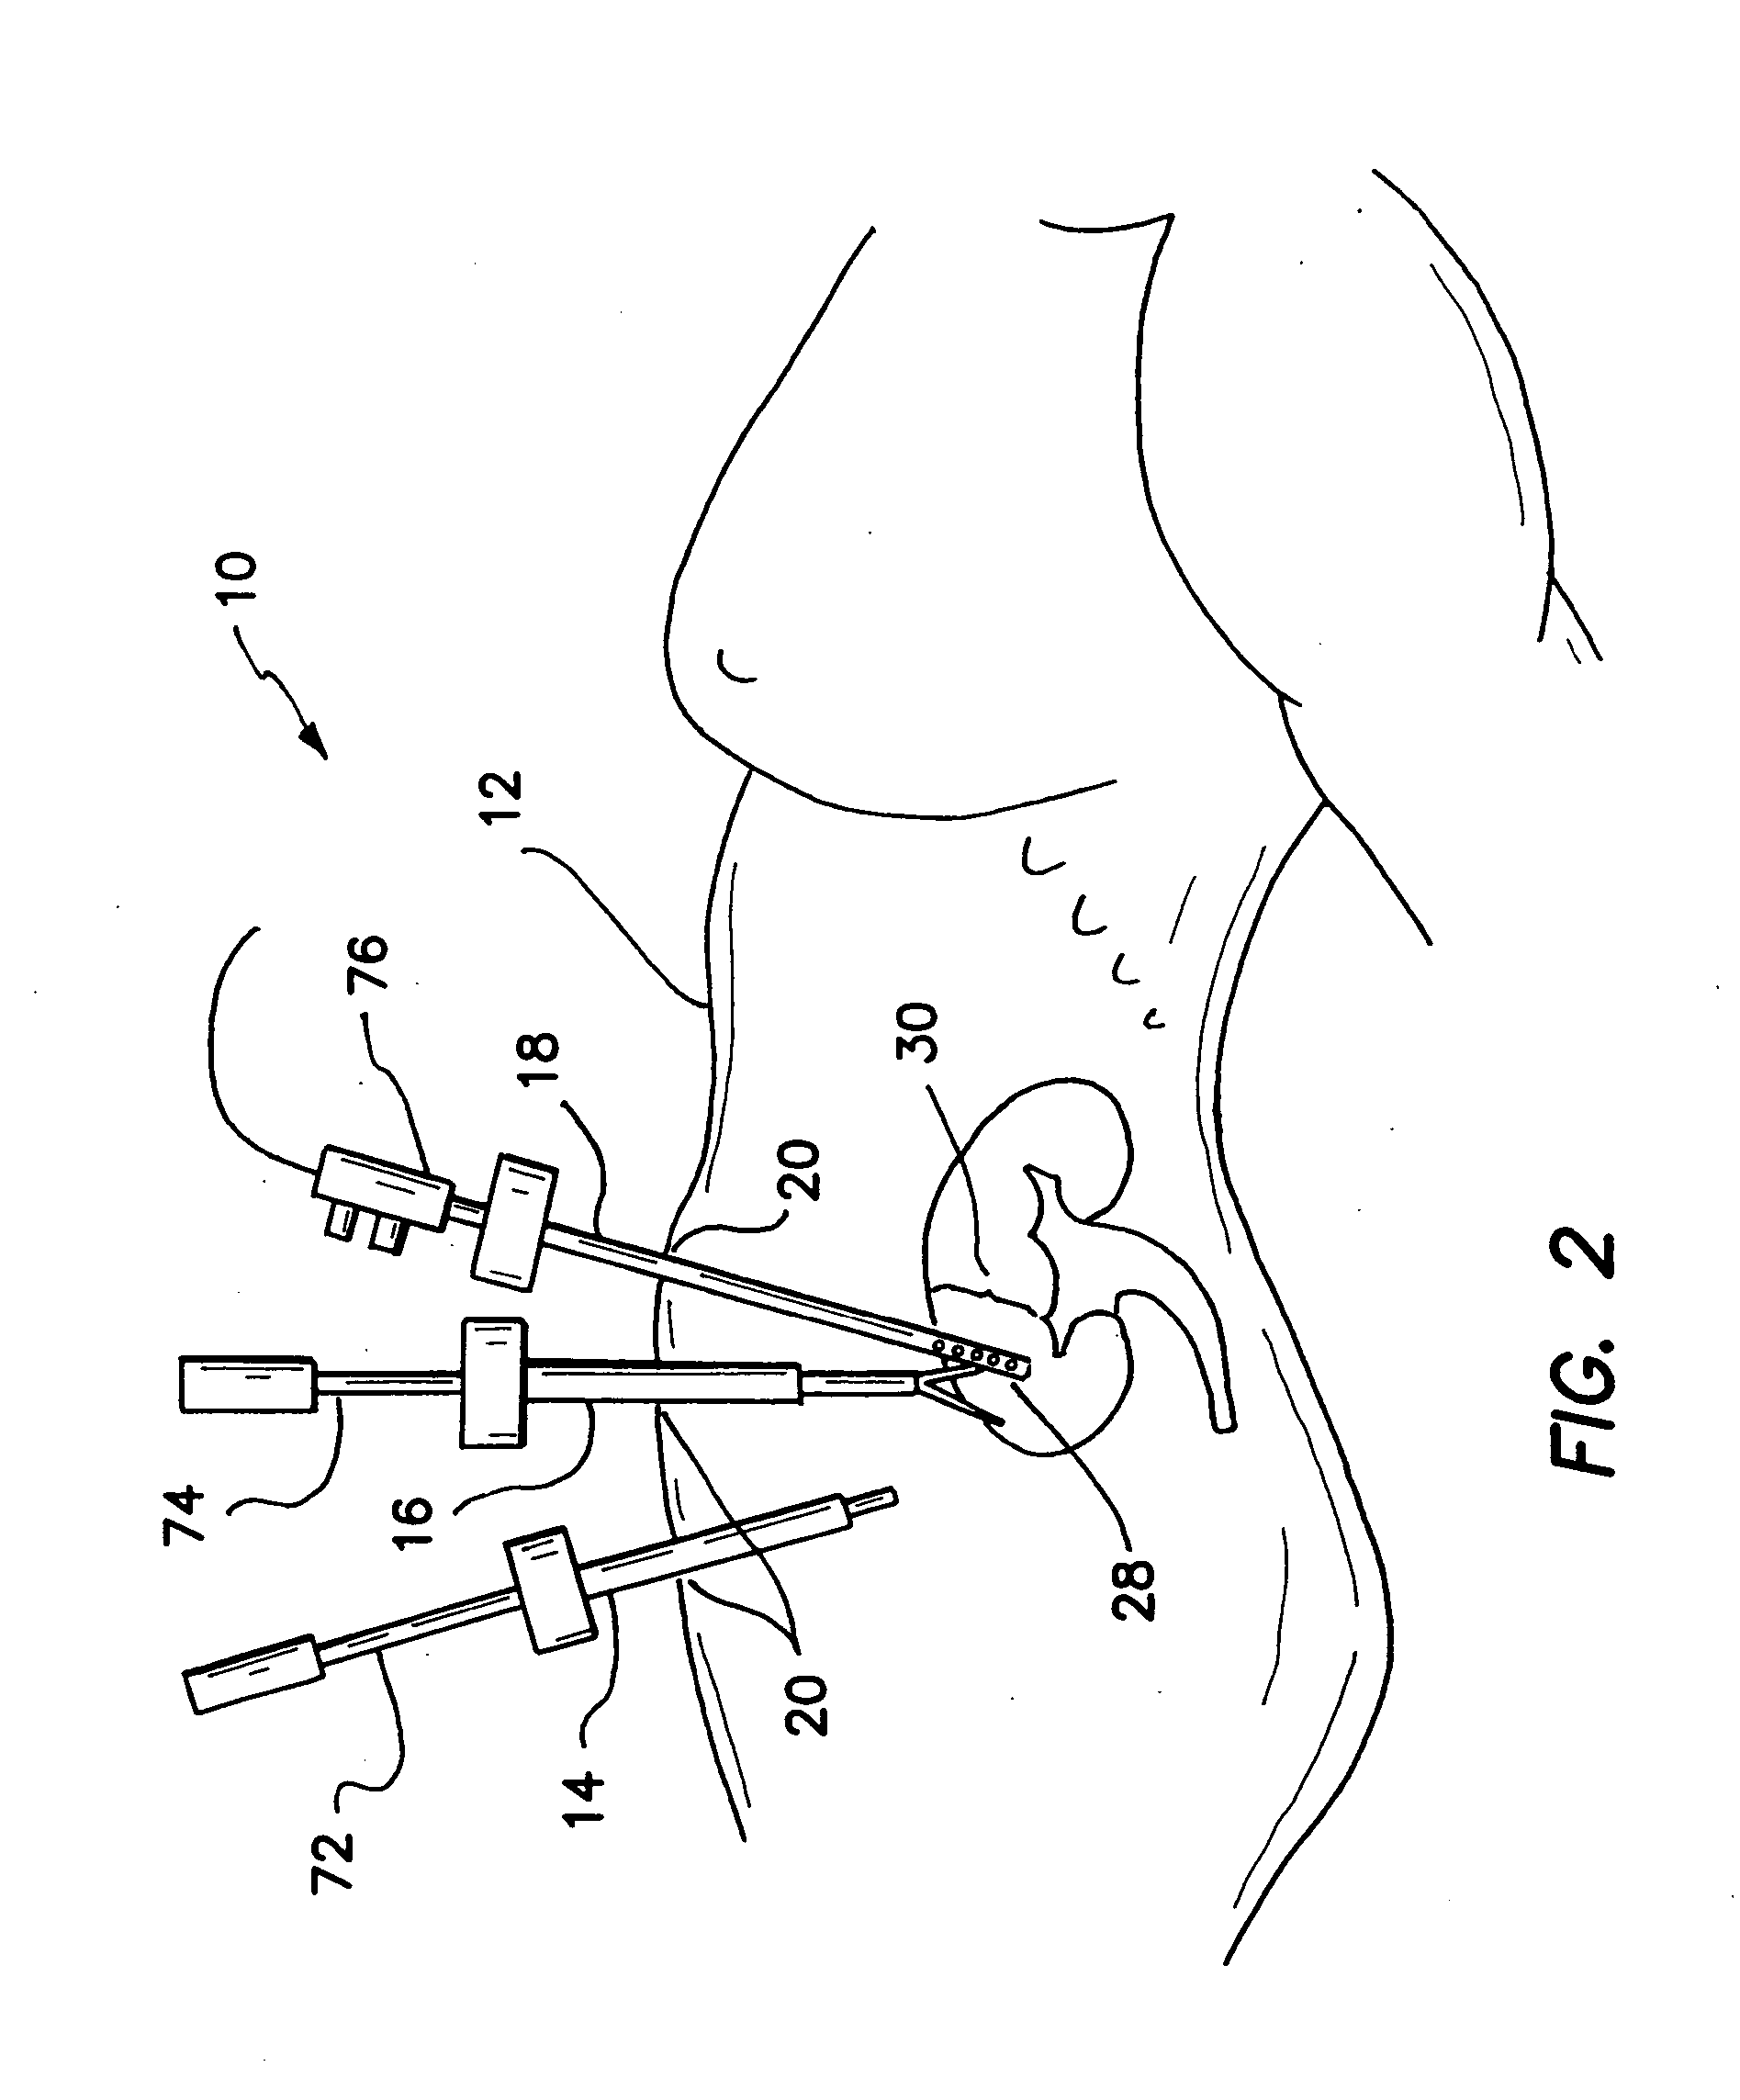 Multiple function surgical device